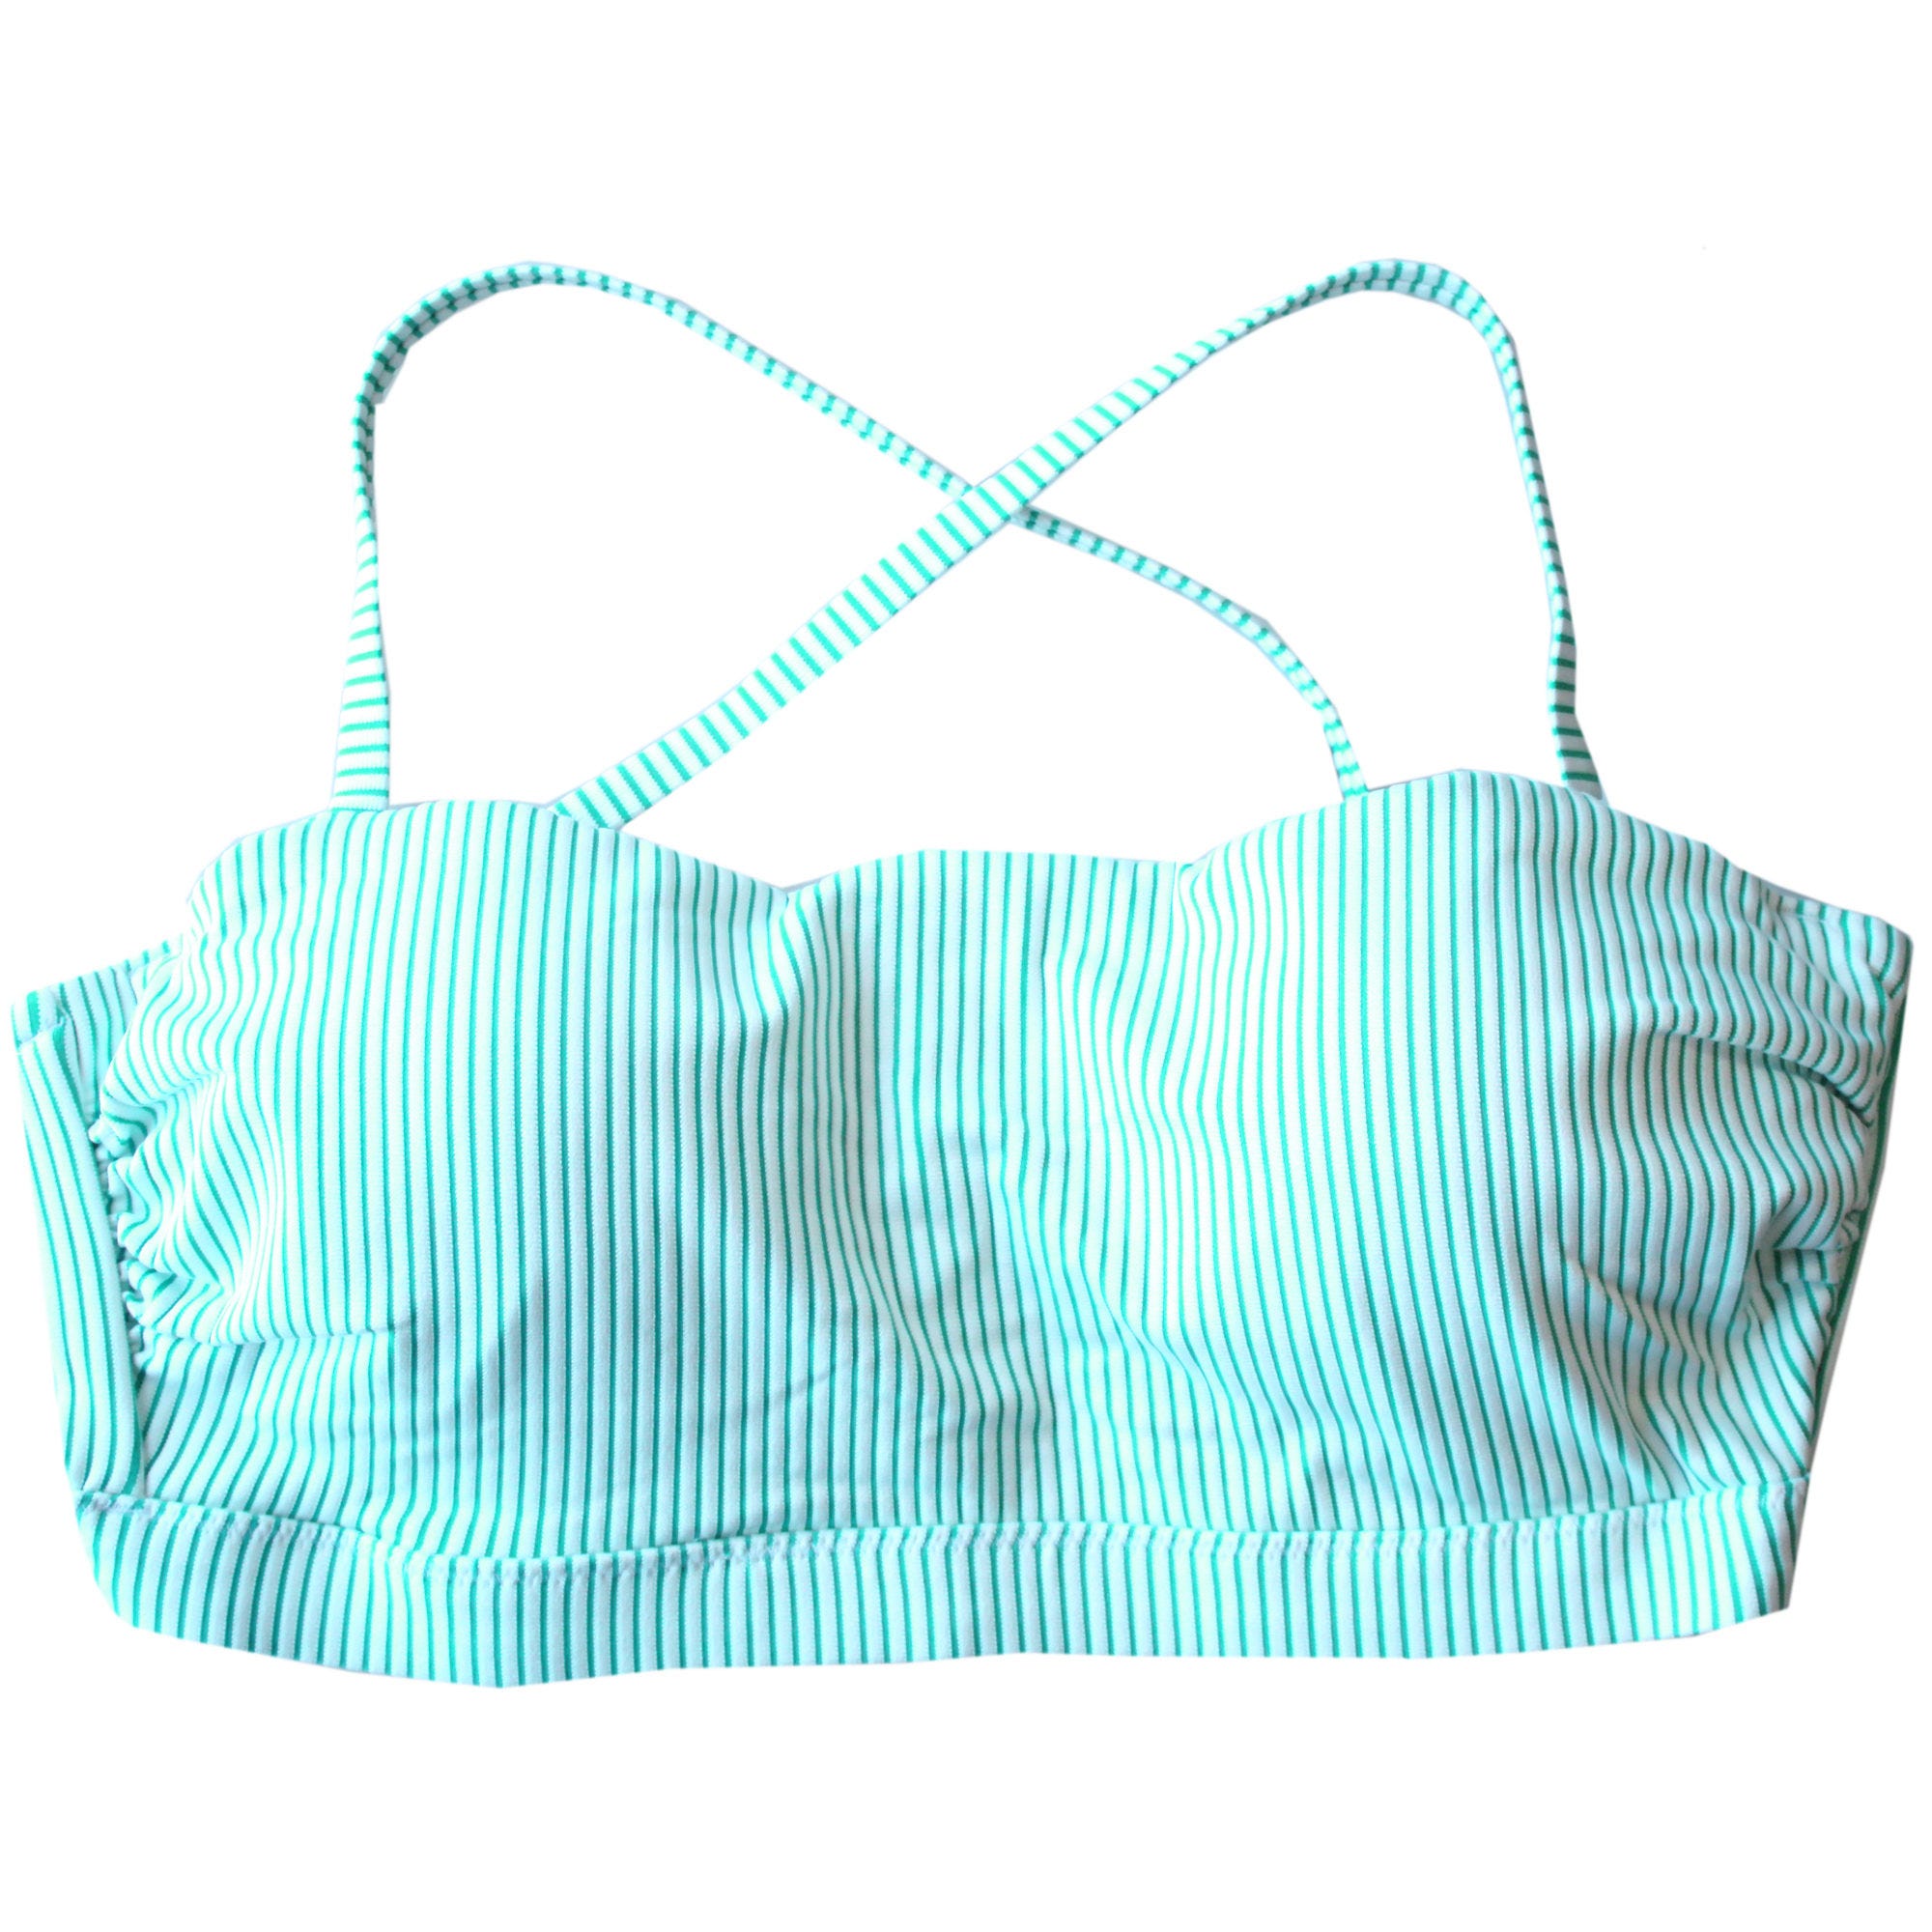 Strong>WOMENStrong>S Bathing Suit Top in Jade Mixed SizeS Per Container - Qty 36